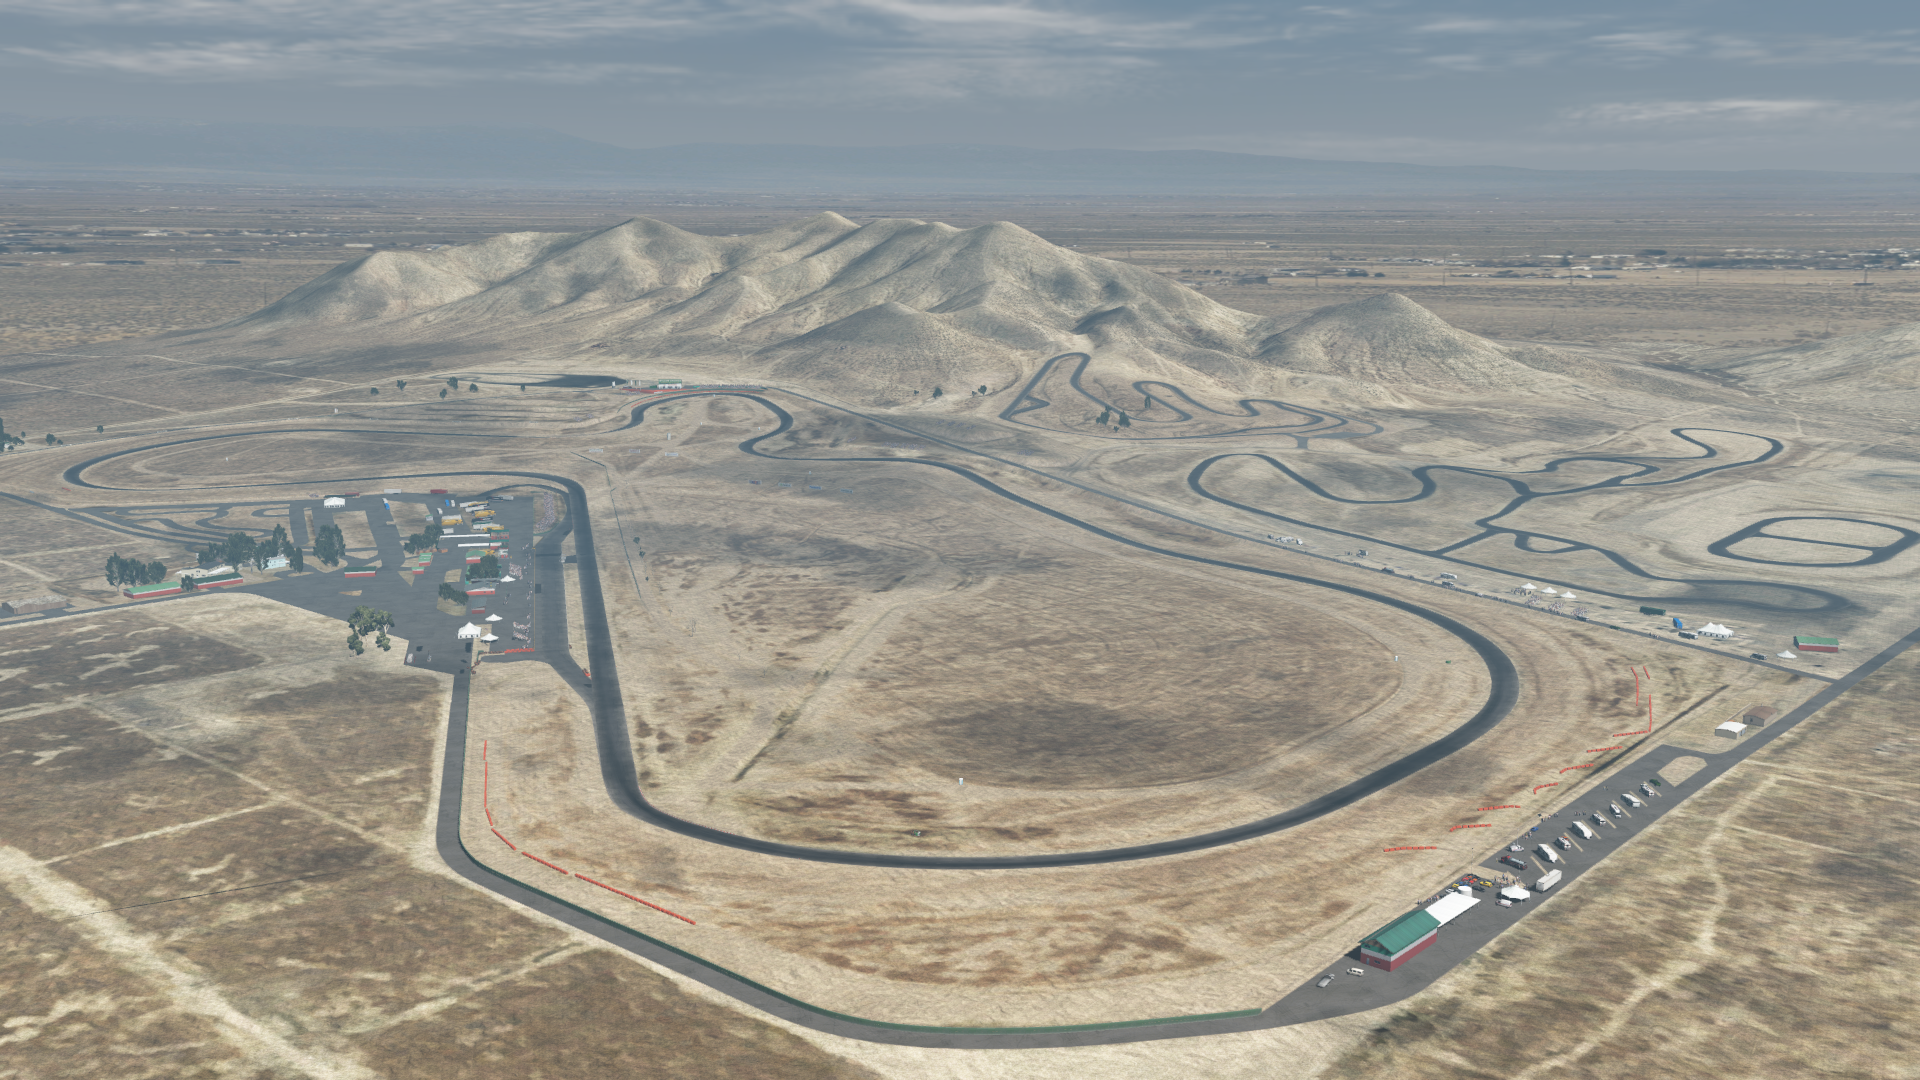 pcars642015-05-0720-05zuh3.png